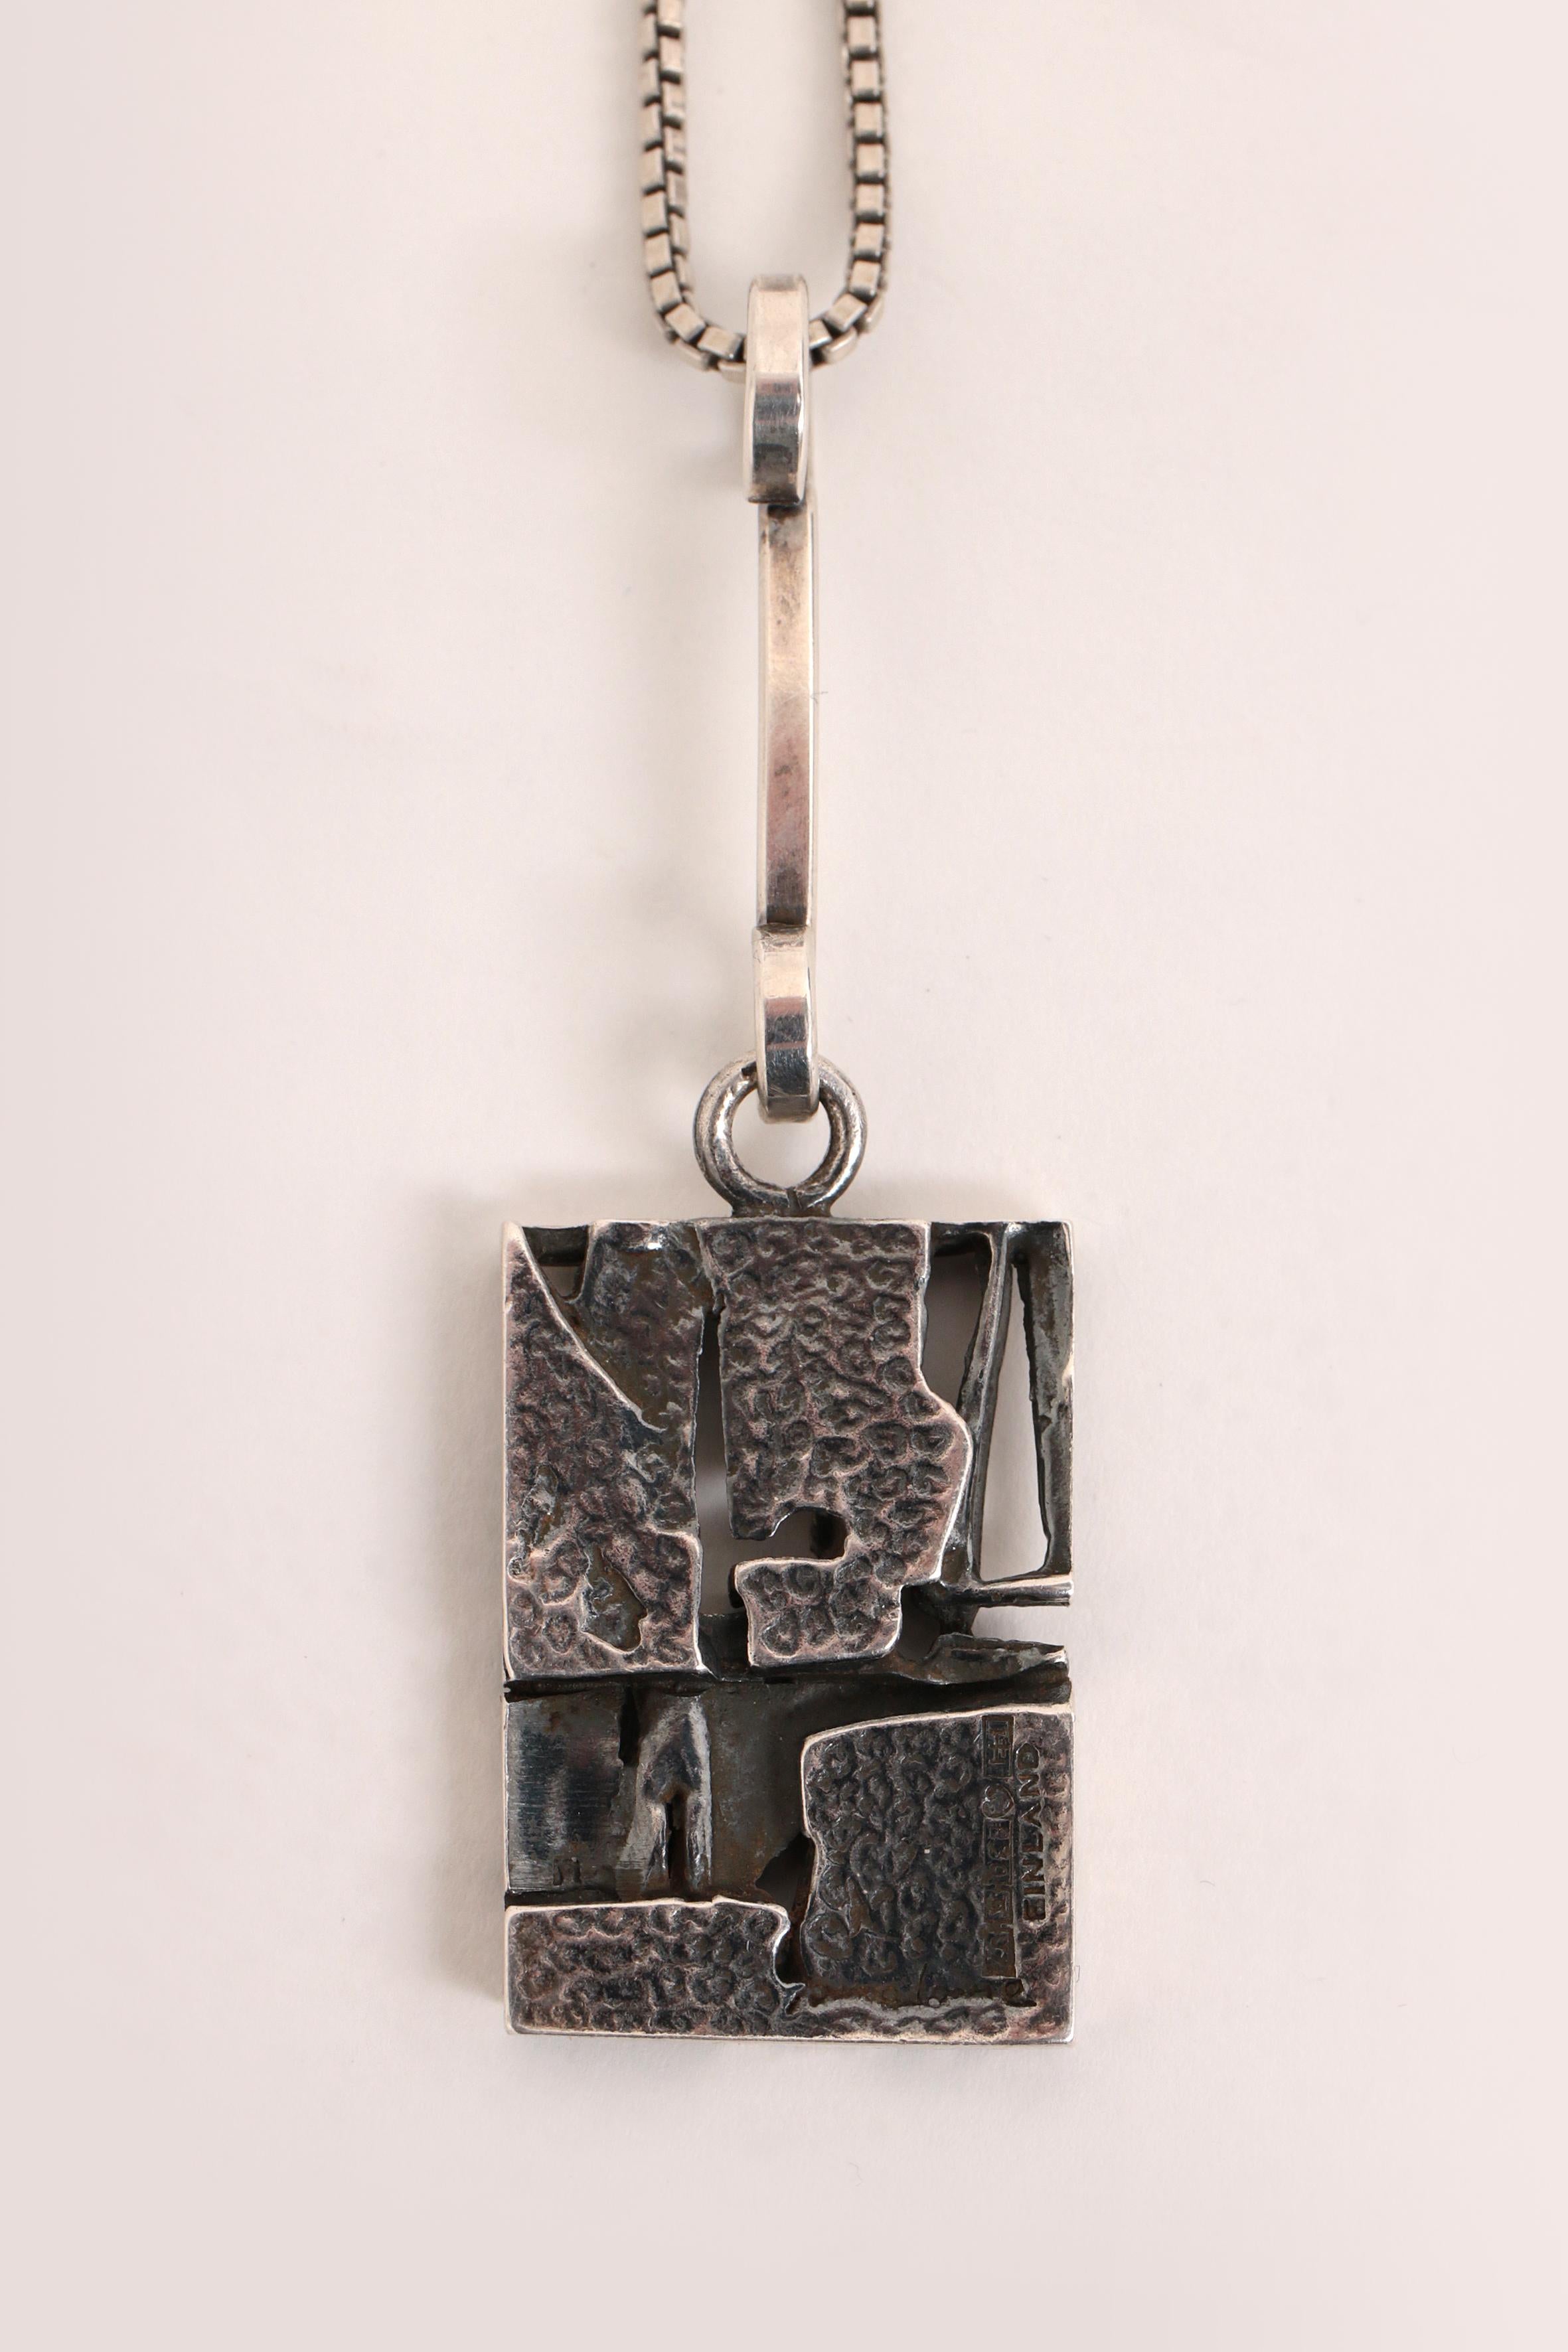 Silver pendant by Jorma Laine Finland, 1973 For Sale 2